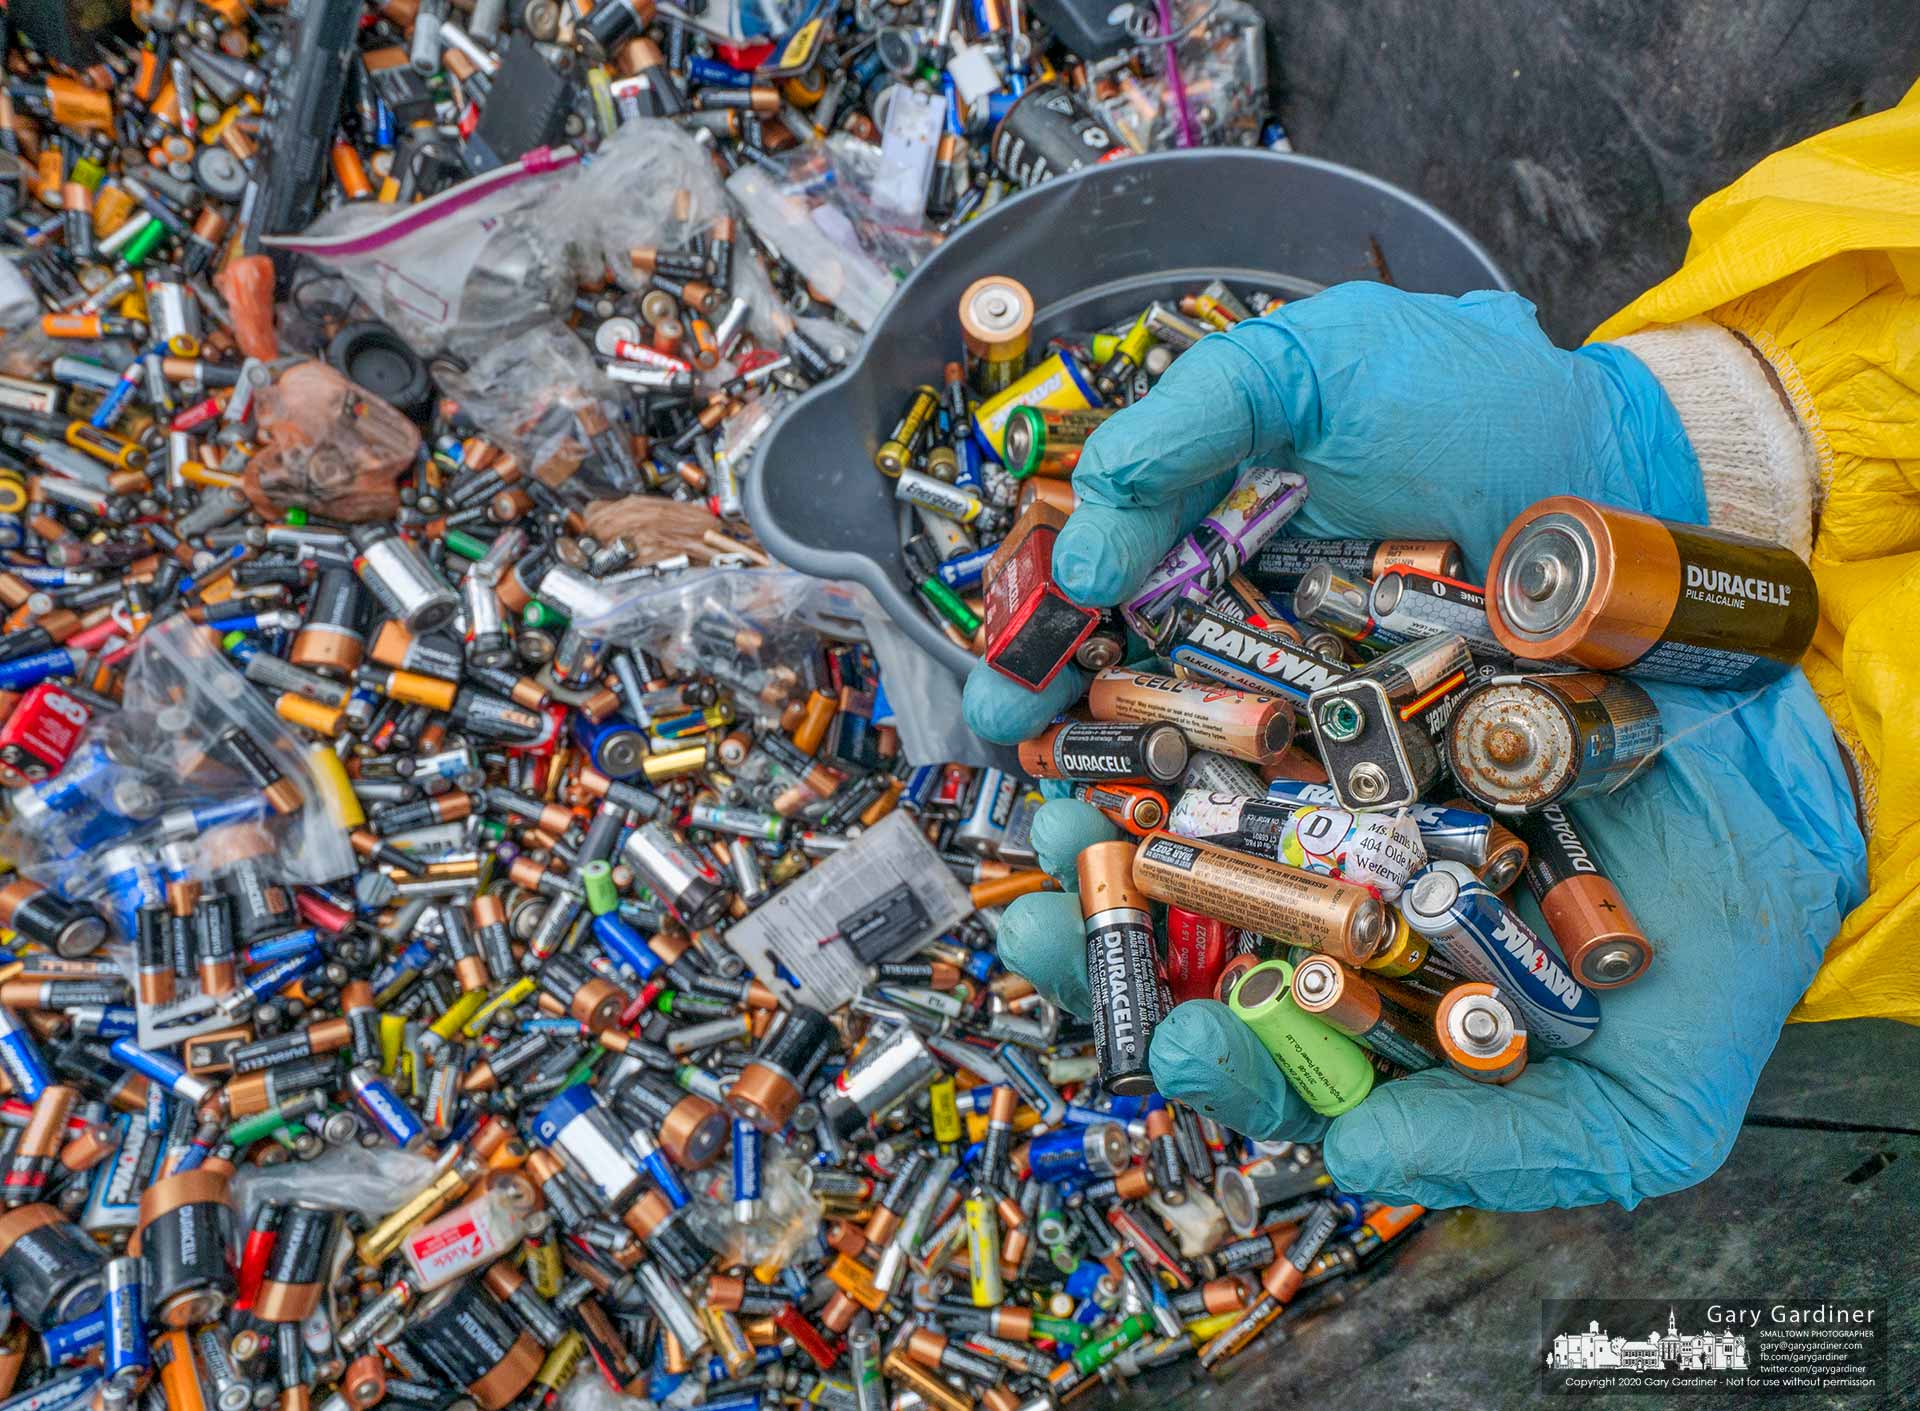 A disposal worker sorts through the thousands of batteries dropped off during the Household Hazardous Waste collection at the city building on Park Meadow Rd. My Final Photo for June 13, 2020.